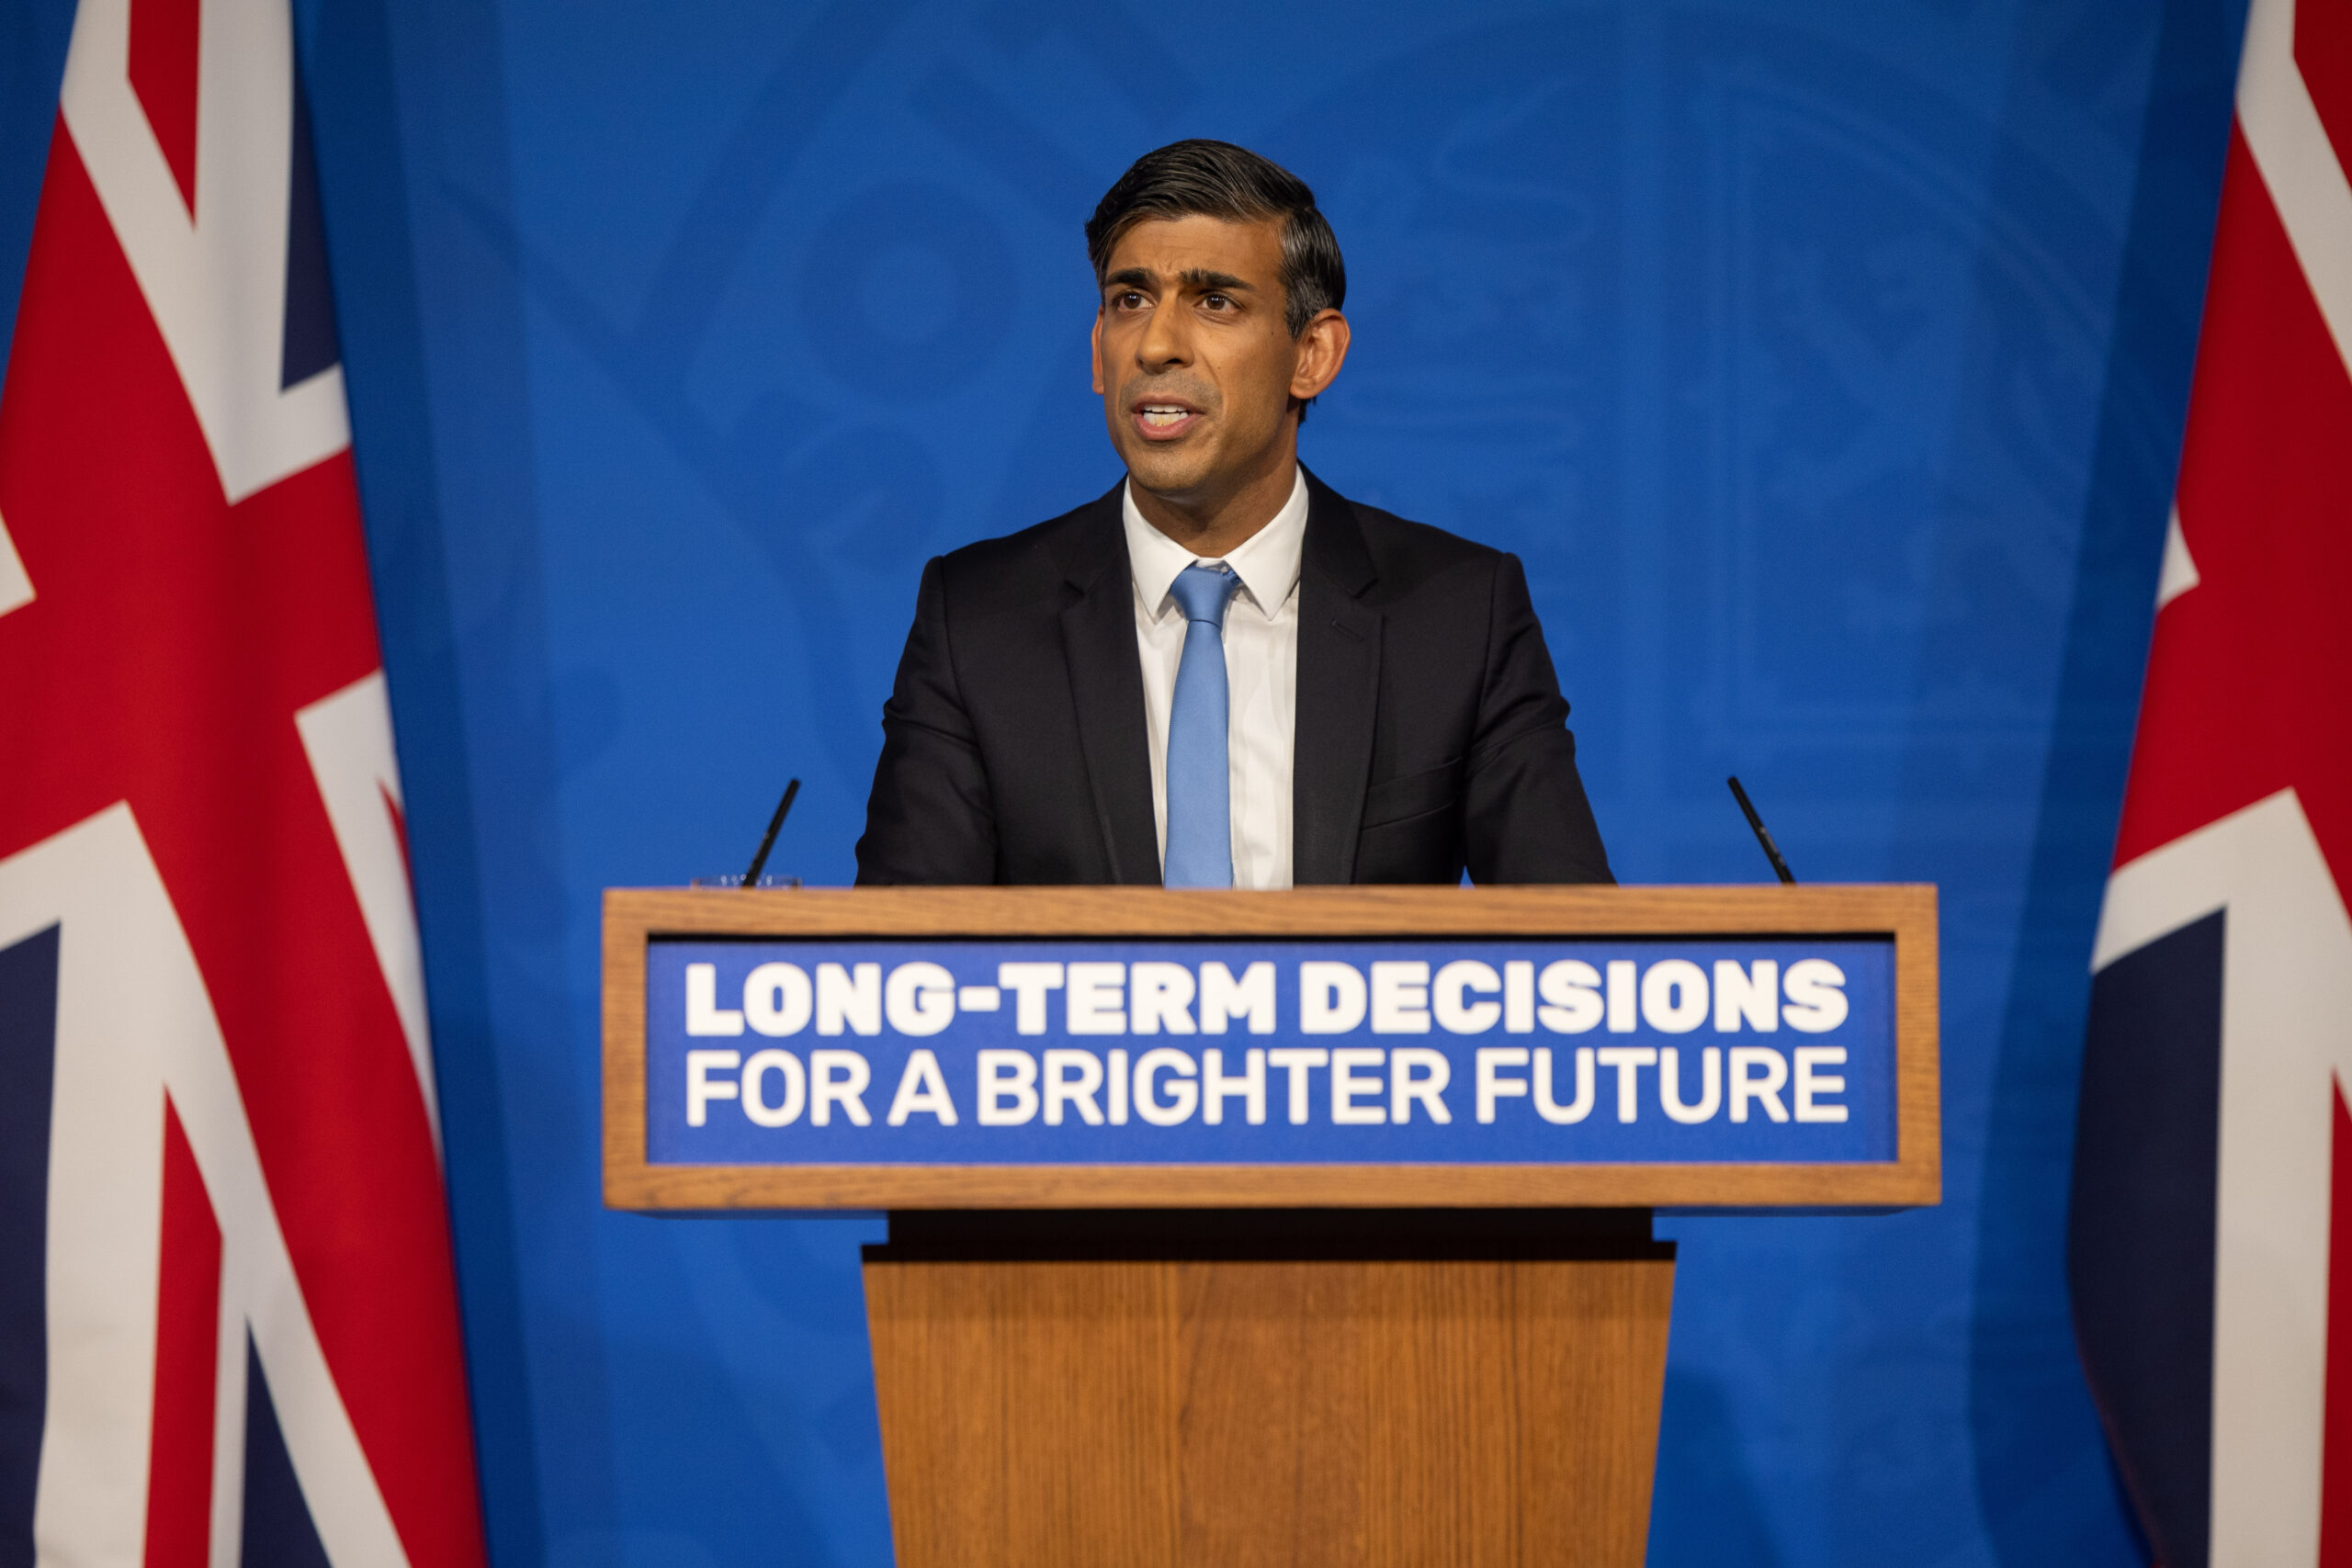 Rishi Sunak holding a Net Zero press conference. He is standing at a lectern stating 'Long-term decisions for a brighter future' in front of a blue background.